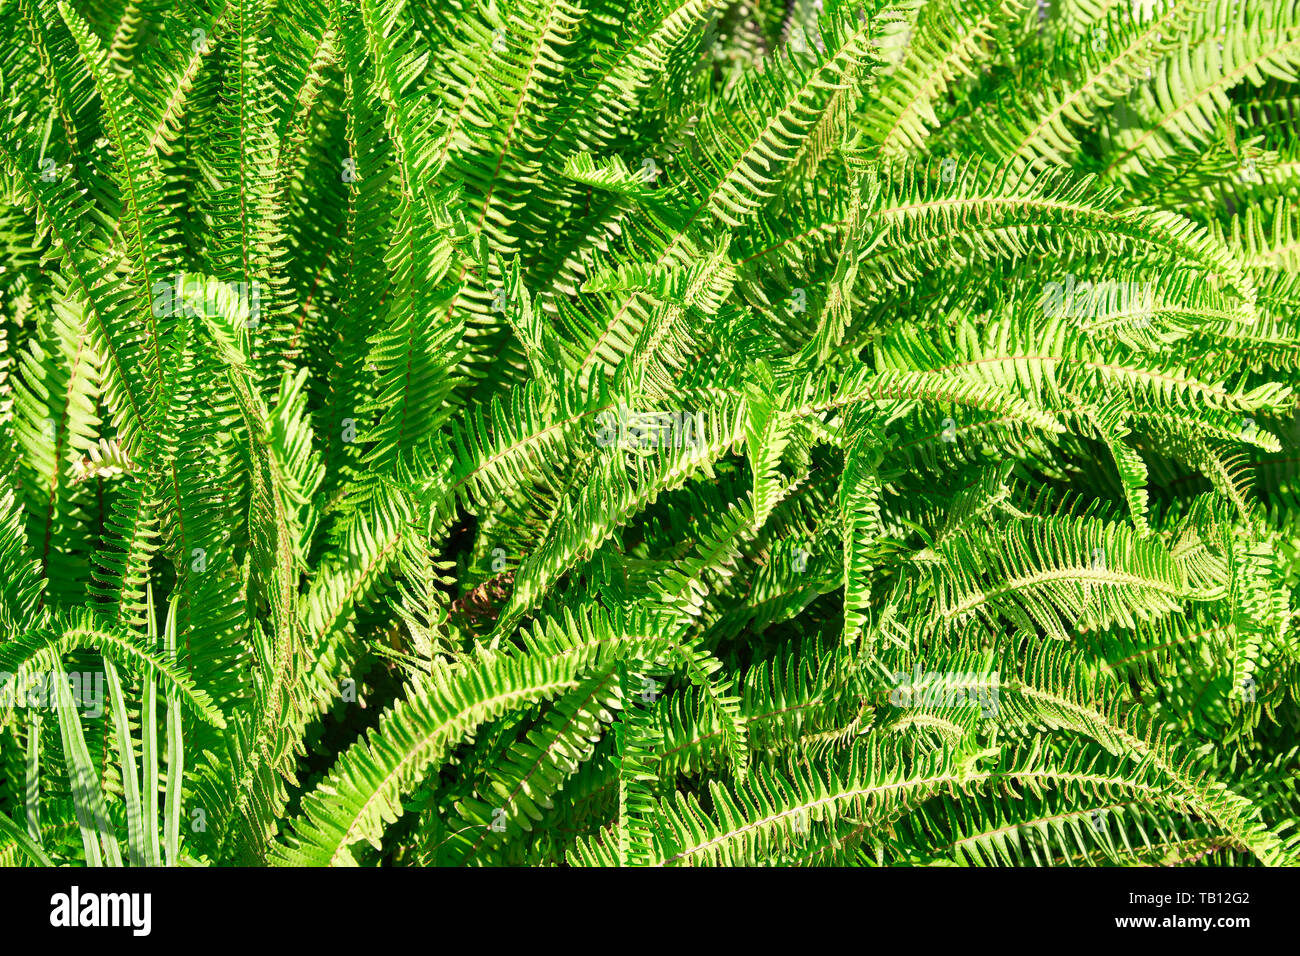 Green fern leaves texture background in sunlight Stock Photo